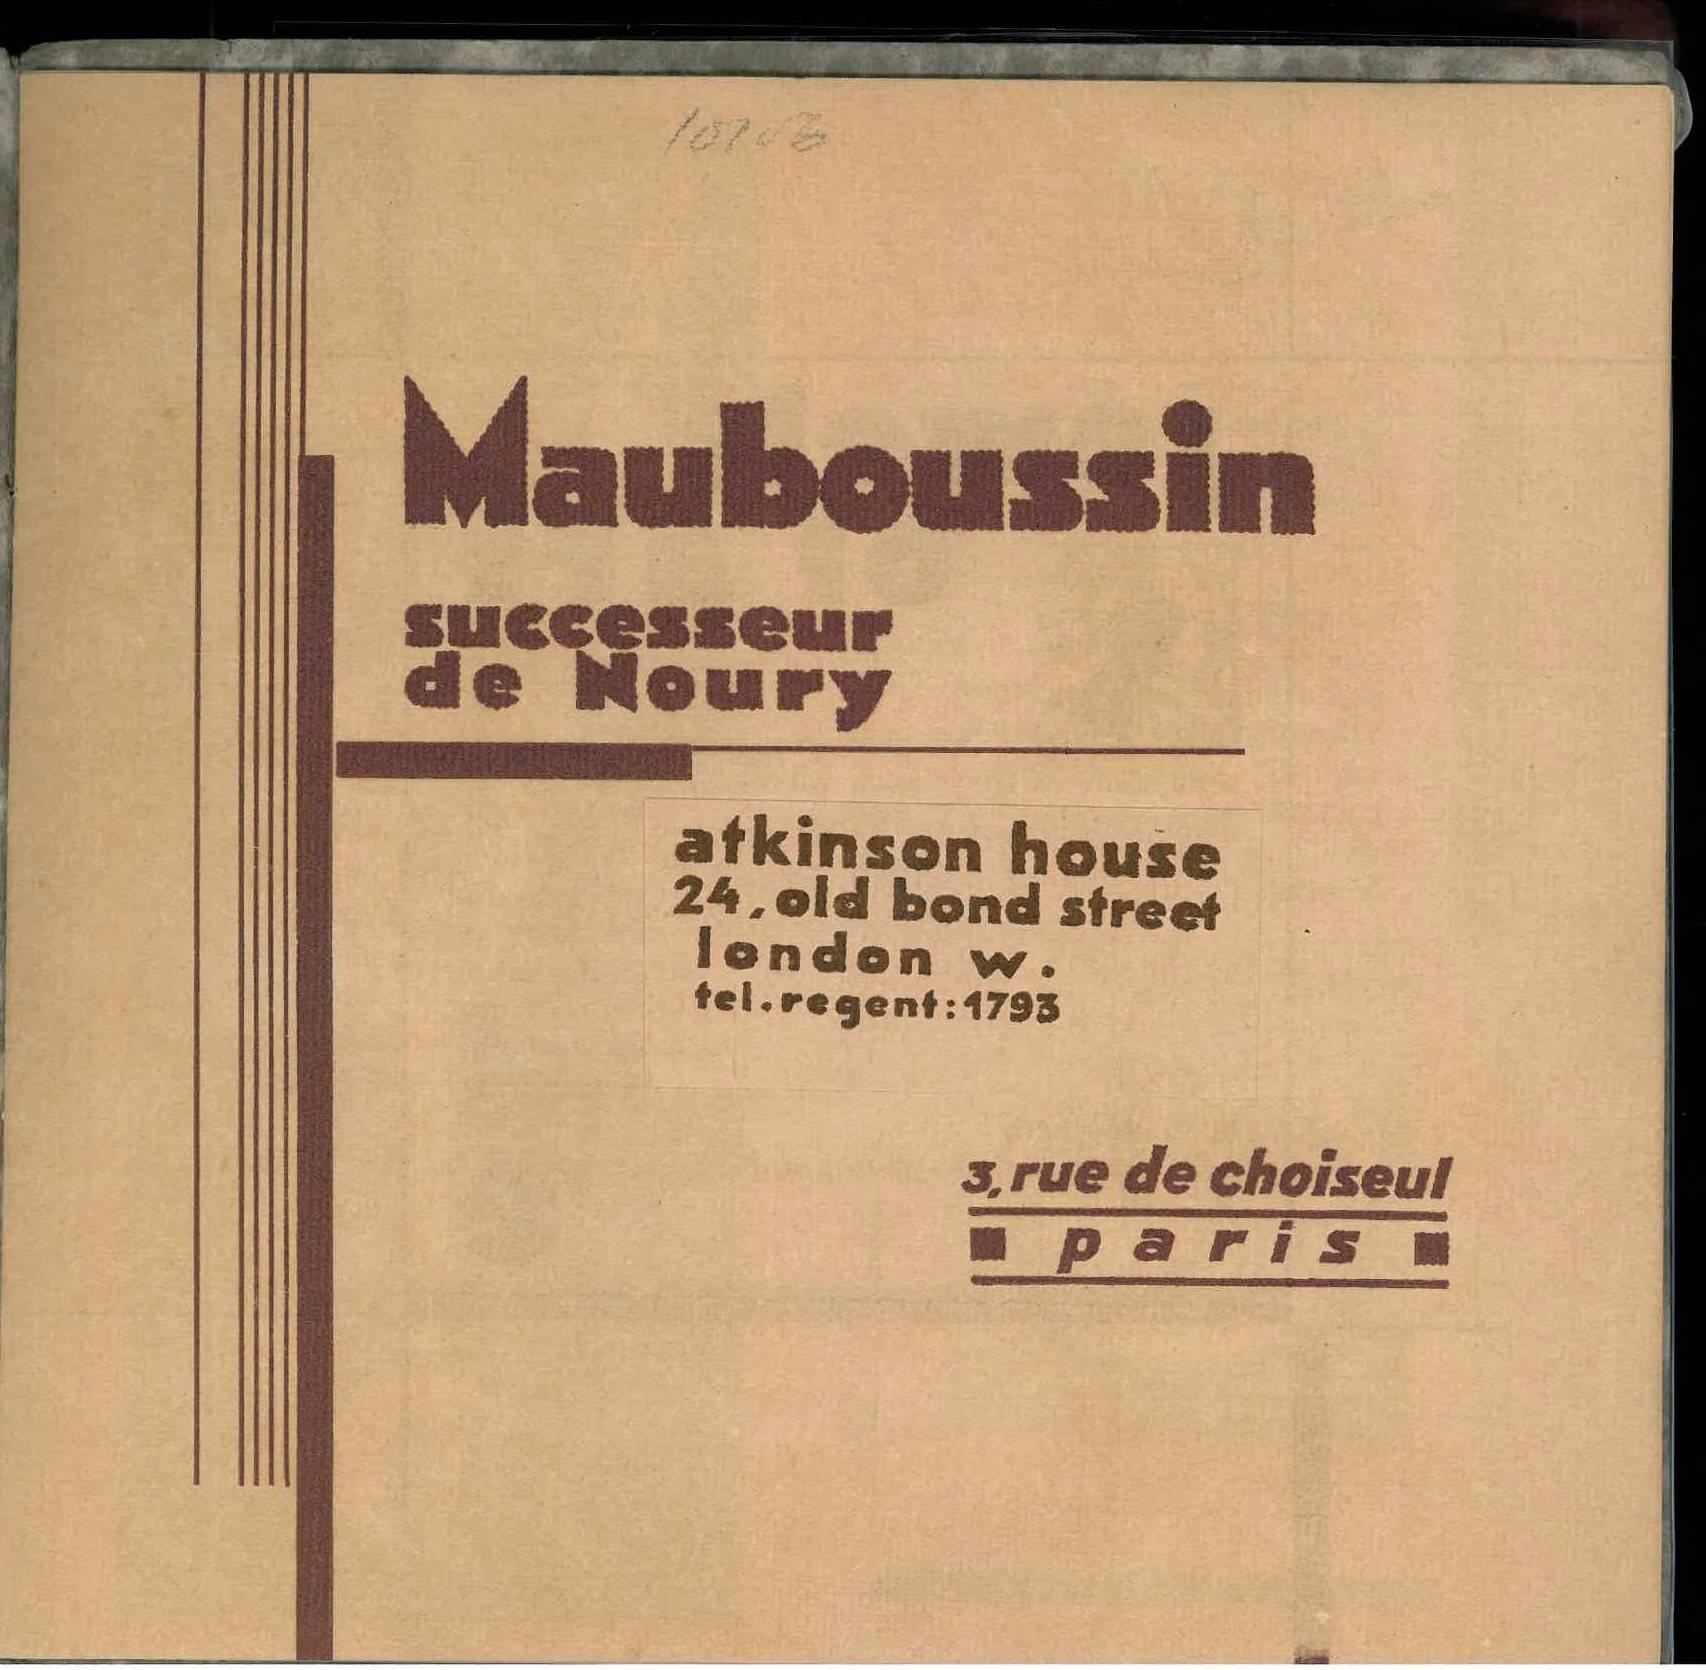 An important and quite superb trade catalogue showing the latest creations by the house of Mauboussin from 1926. Exquisitely produced by the famed graphic design studio of Tolmer in Paris for an elite clientele, illustrated with 18 tipped in